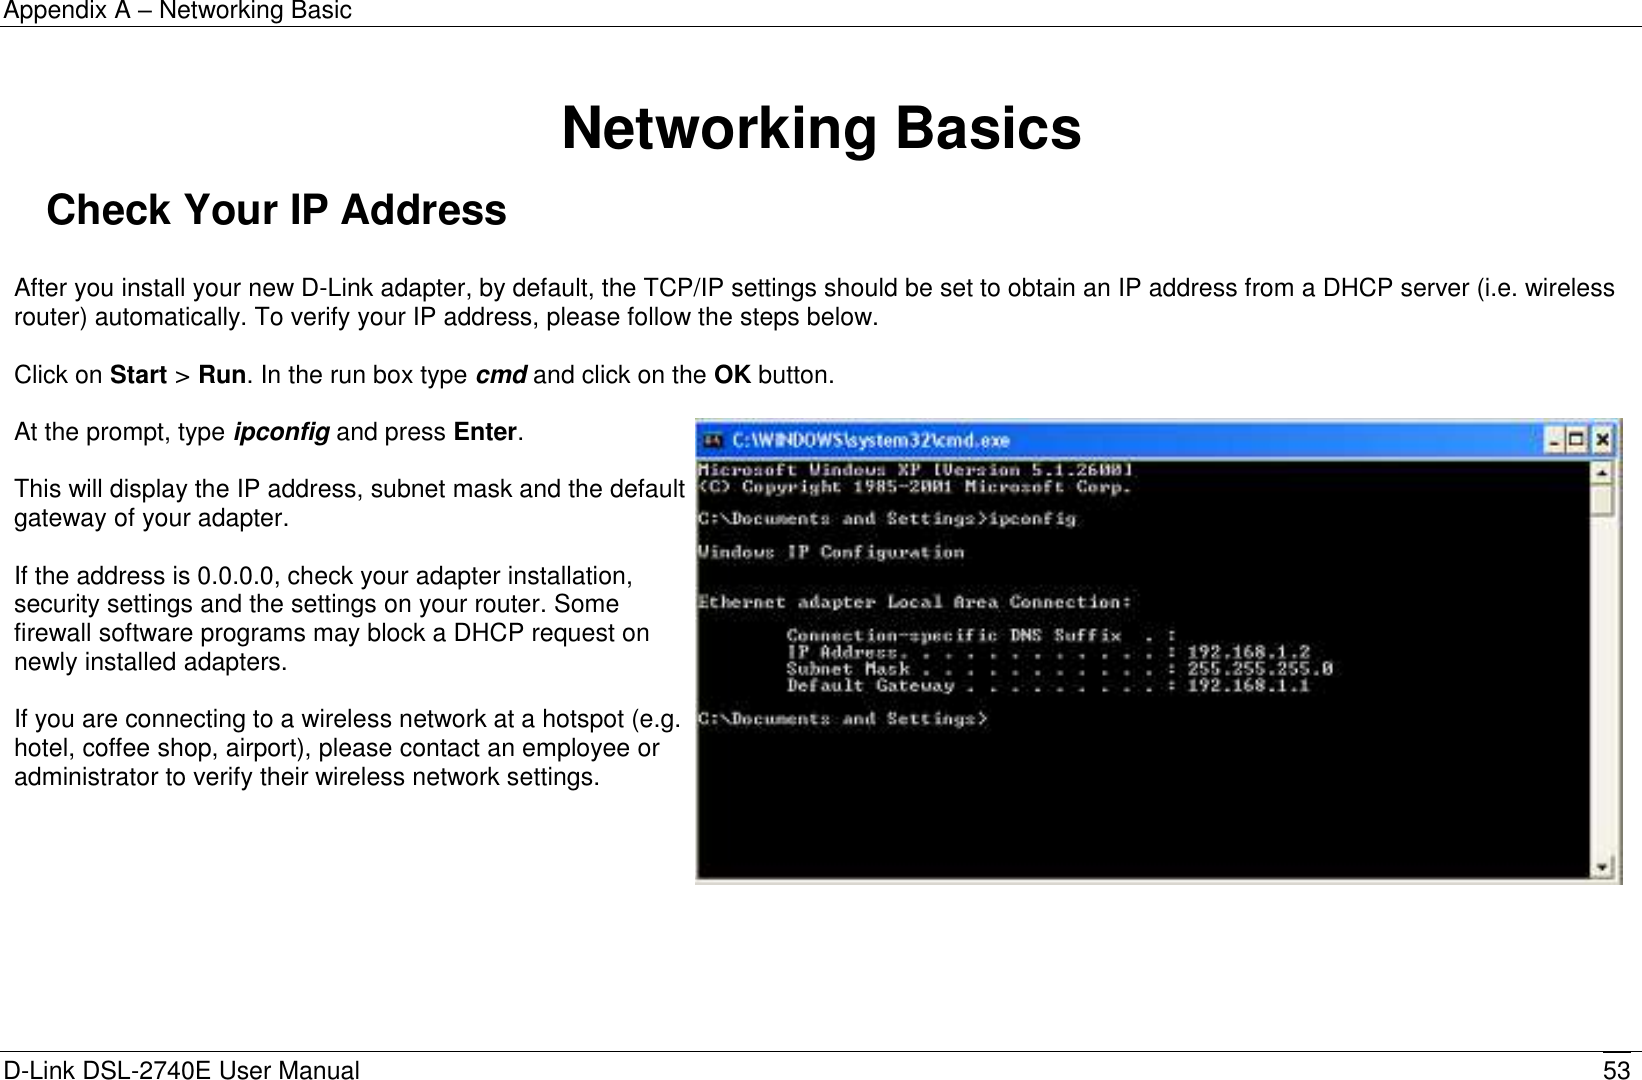 Appendix A – Networking Basic D-Link DSL-2740E User Manual 53   Networking Basics Check Your IP Address  After you install your new D-Link adapter, by default, the TCP/IP settings should be set to obtain an IP address from a DHCP server (i.e. wireless router) automatically. To verify your IP address, please follow the steps below.  Click on Start &gt; Run. In the run box type cmd and click on the OK button.  At the prompt, type ipconfig and press Enter.  This will display the IP address, subnet mask and the default gateway of your adapter.  If the address is 0.0.0.0, check your adapter installation, security settings and the settings on your router. Some firewall software programs may block a DHCP request on newly installed adapters.  If you are connecting to a wireless network at a hotspot (e.g. hotel, coffee shop, airport), please contact an employee or administrator to verify their wireless network settings.       